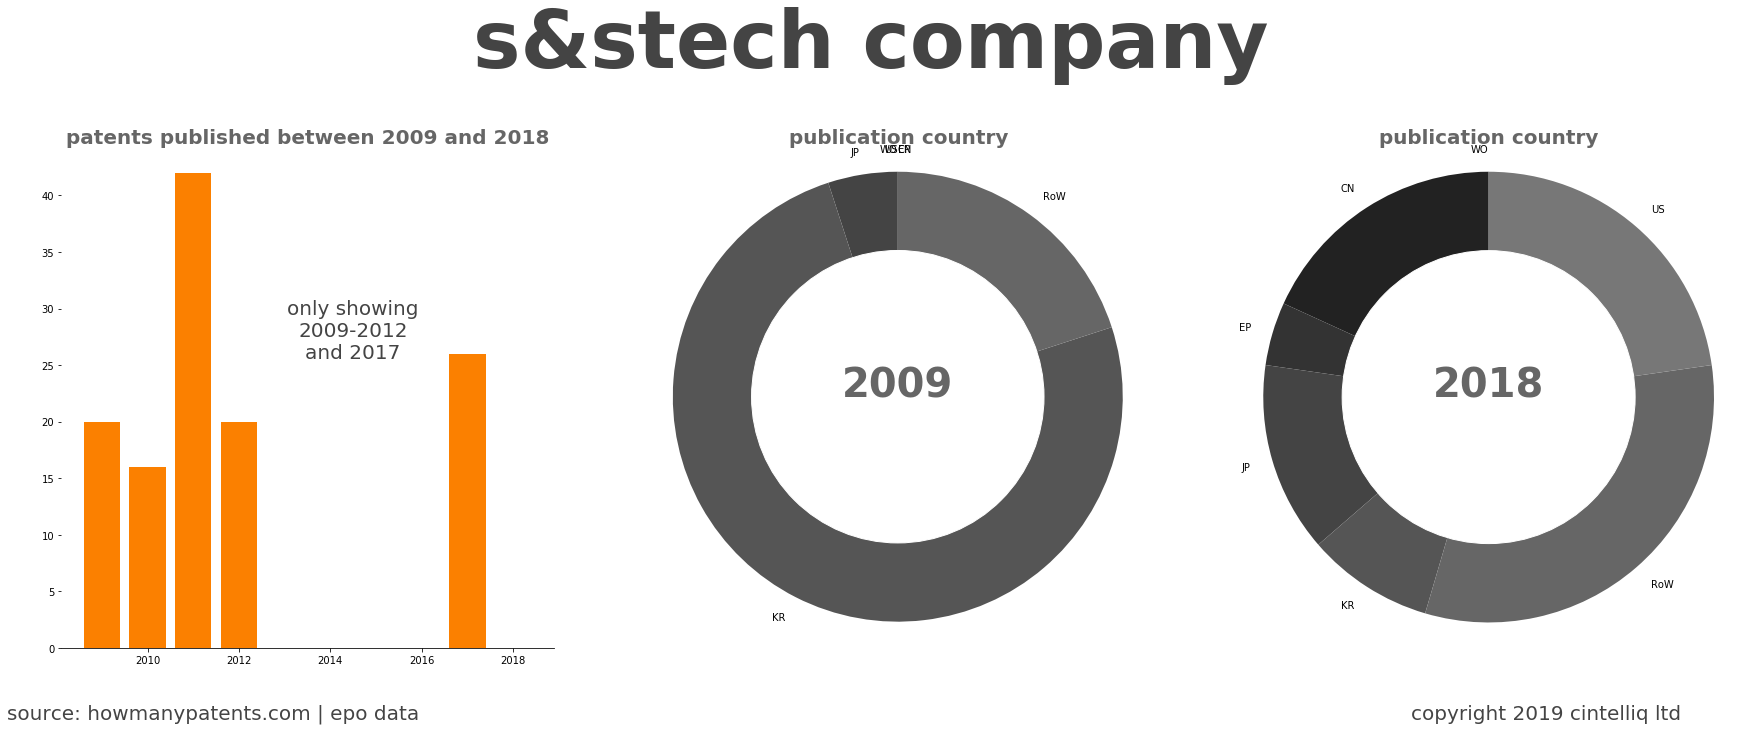 summary of patents for S&Stech Company